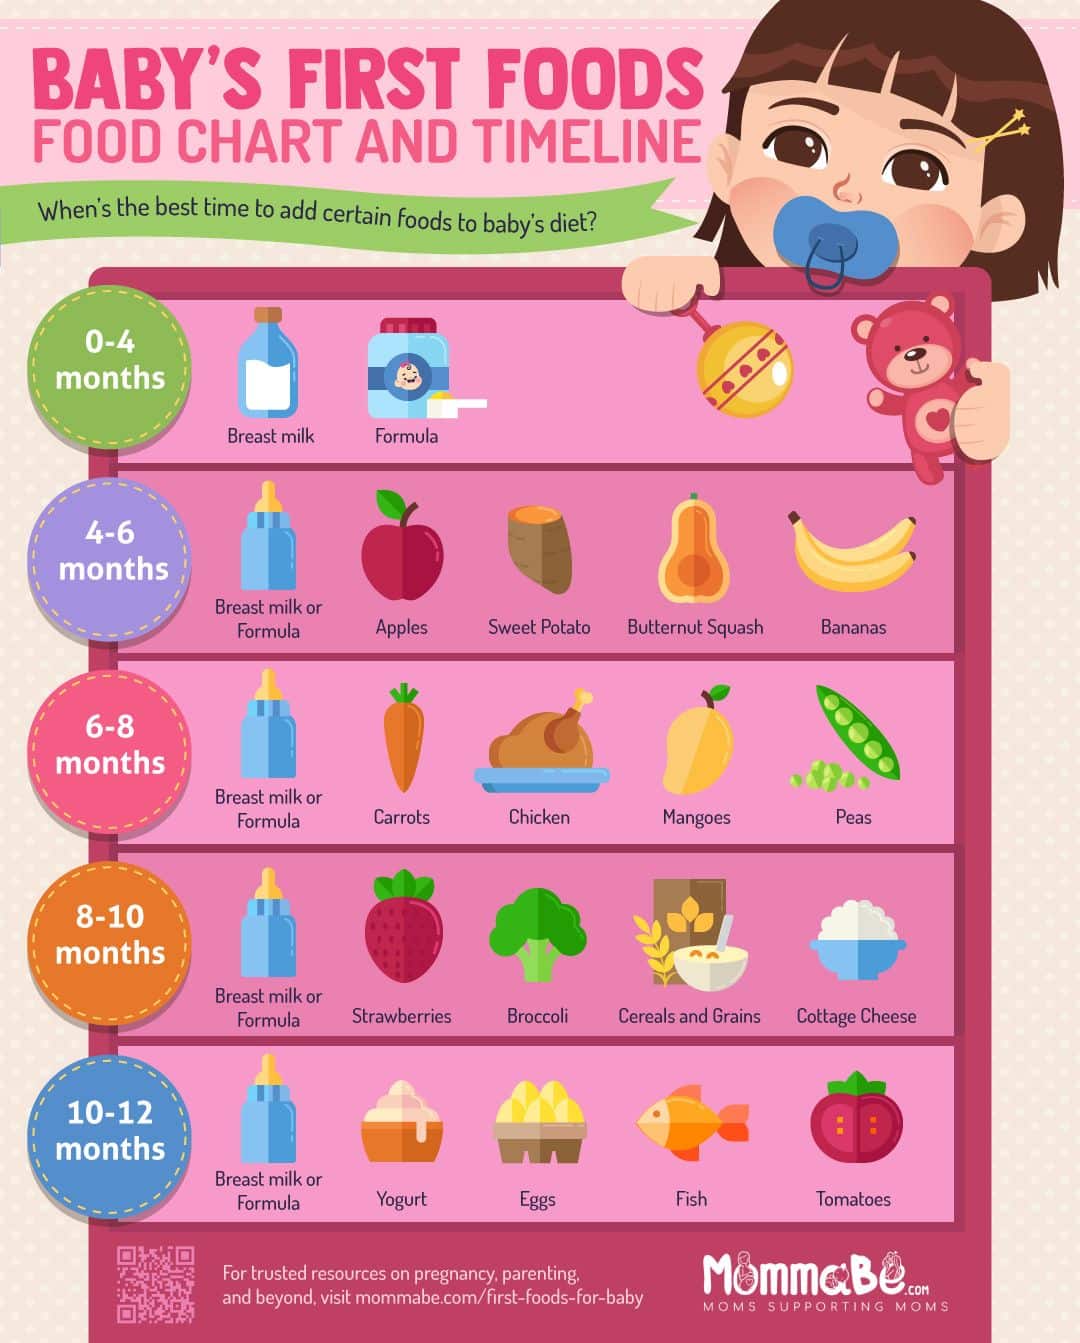 9 Healthiest First Foods for Baby + Recipes [INFOGRAPHIC]